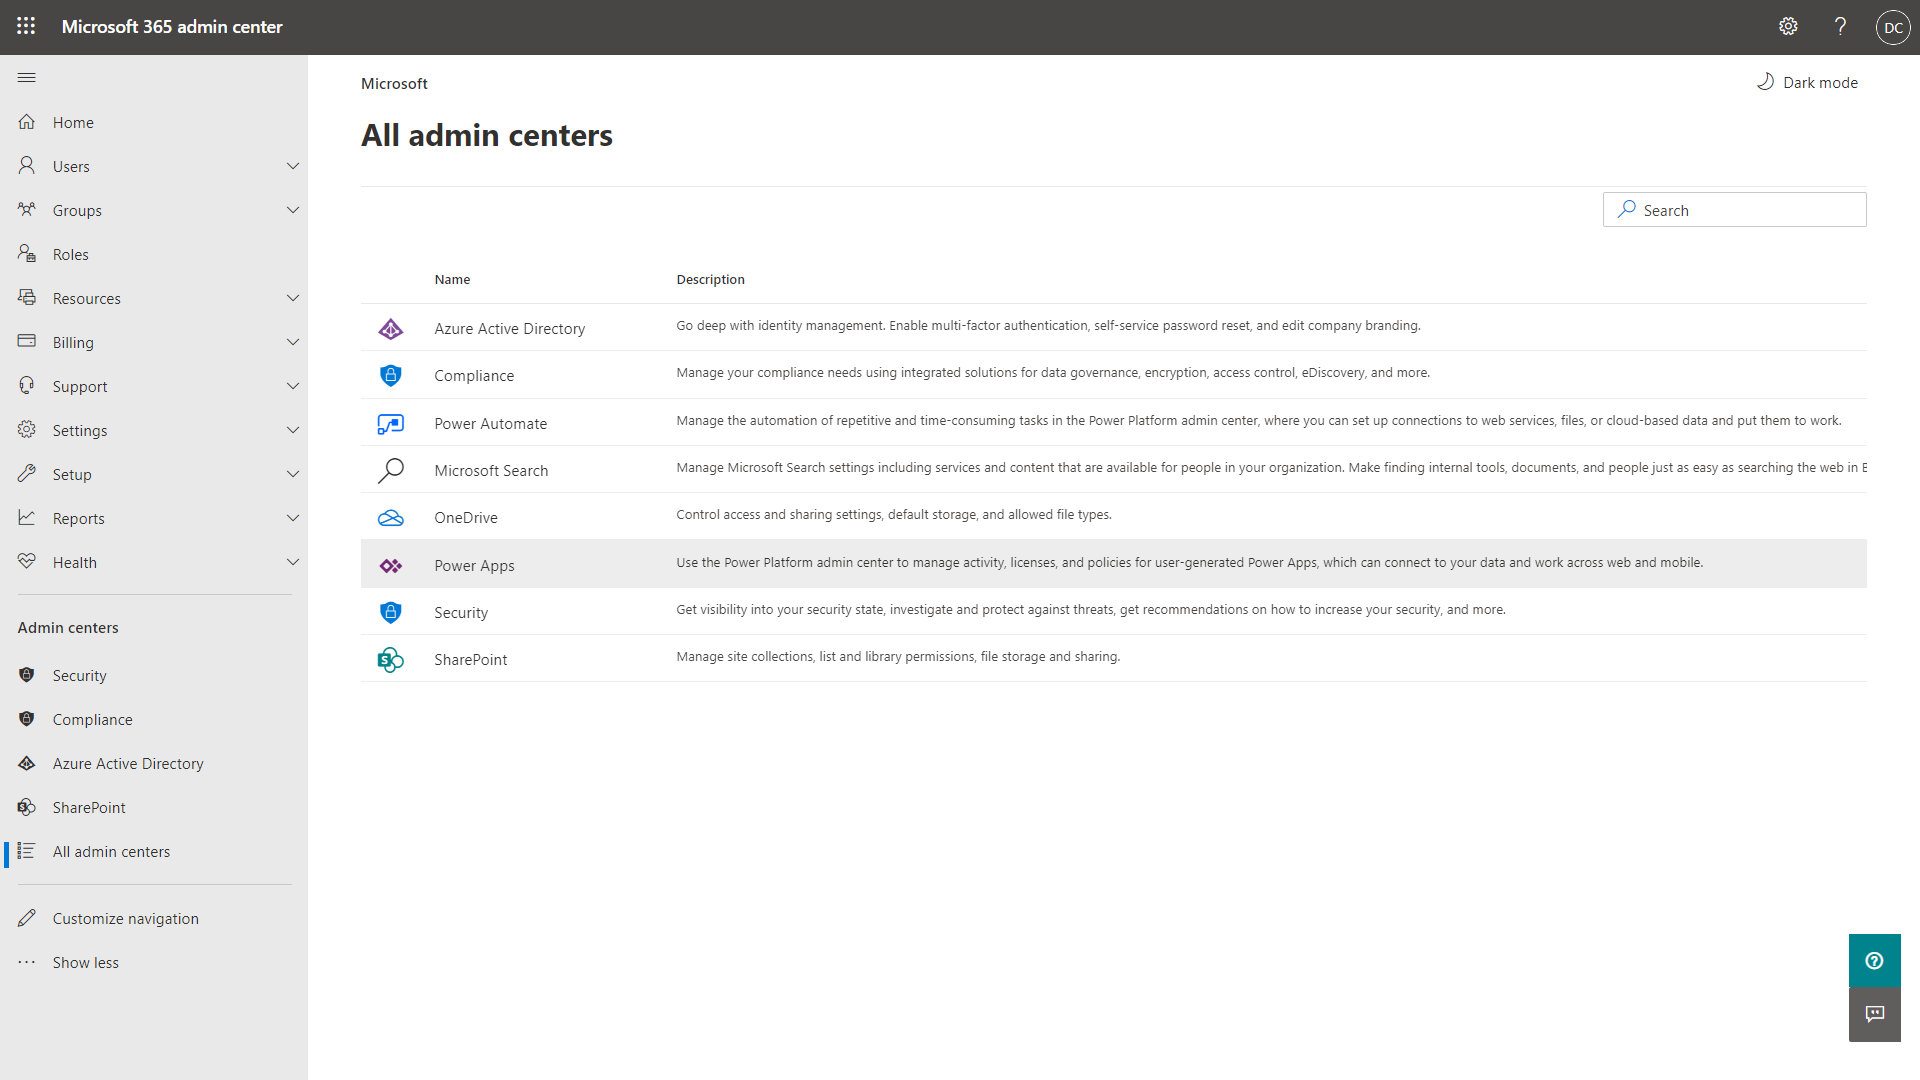 Screenshot of the list of admin centers in the Microsoft 365 admin center.